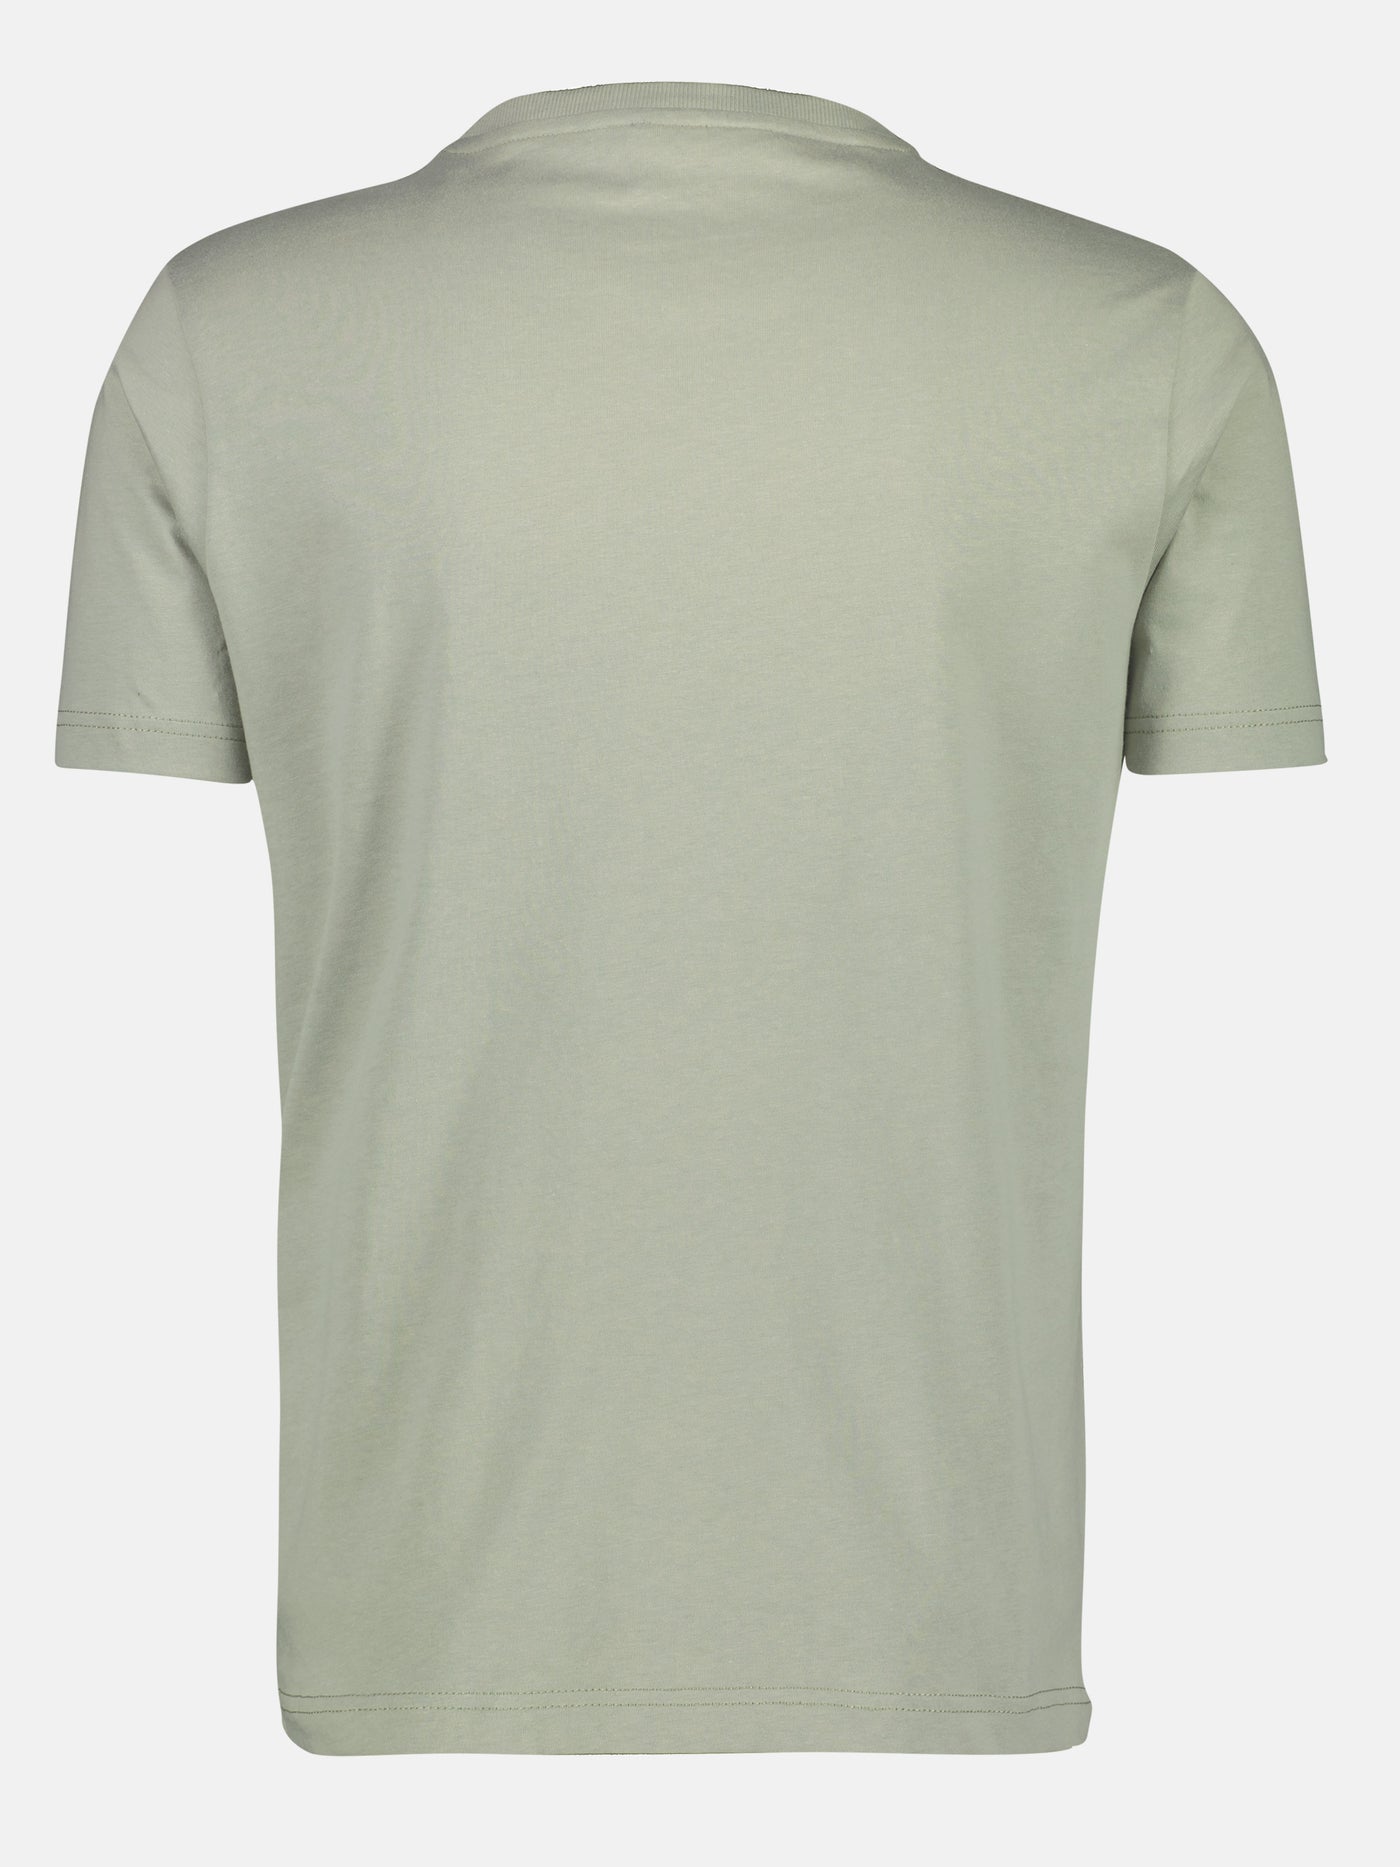 Round-neck T-shirt with a subtle chest print